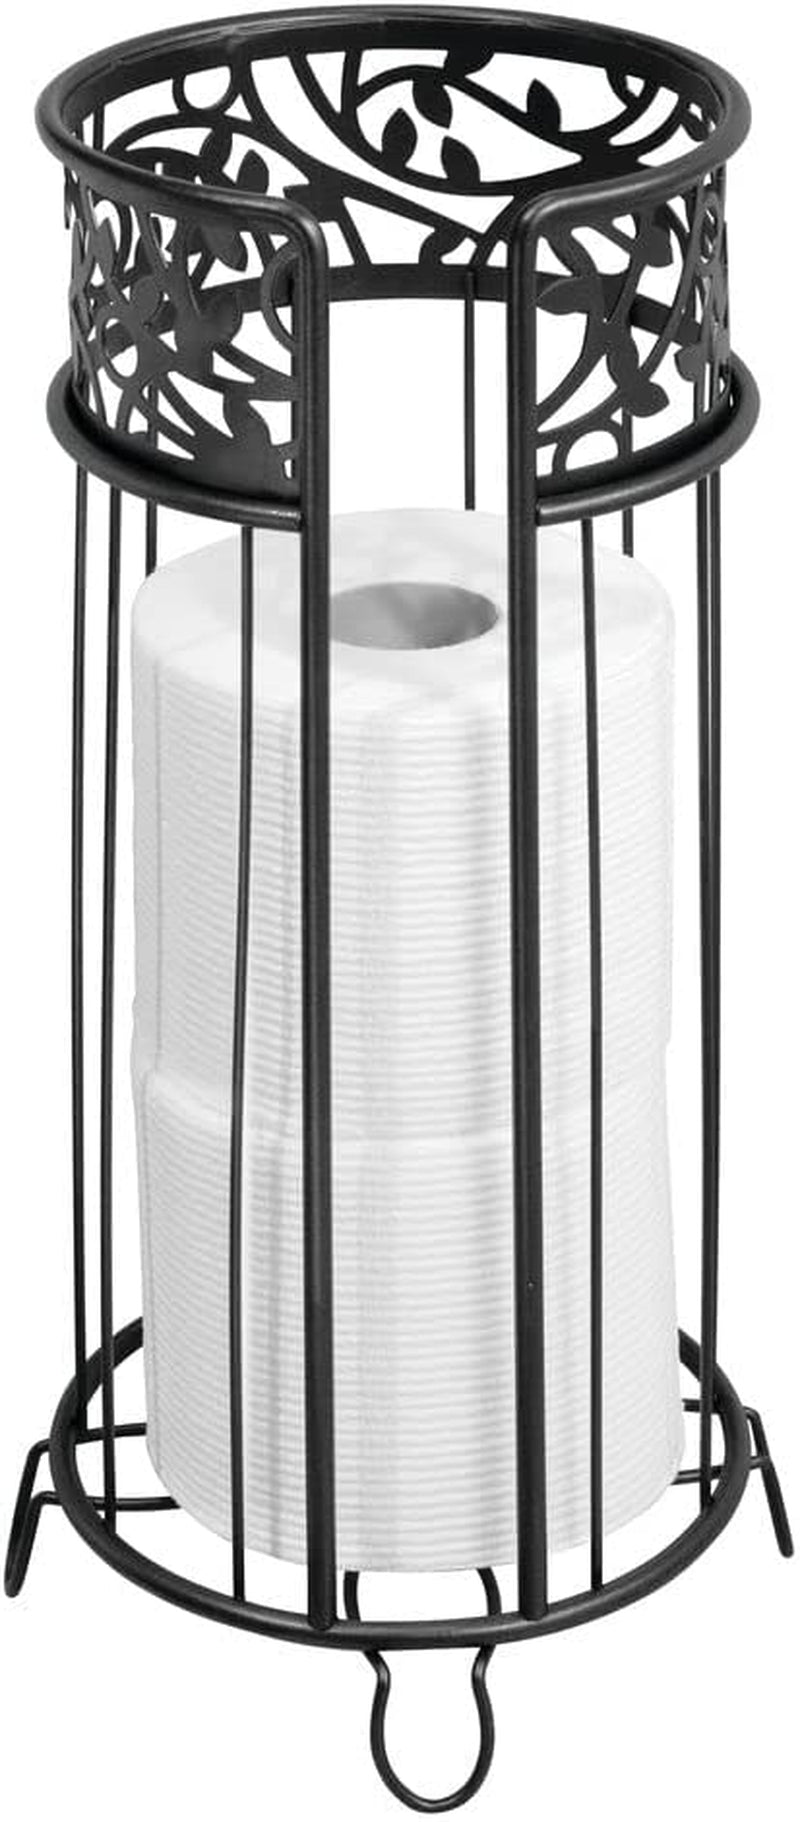 mDesign, Mdesign Decorative Free Standing Toilet Paper Holder Stand with Storage for 3 Rolls of Toilet Tissue - for Bathroom/Powder Room - Holds Mega Rolls - Durable Metal Wire - Soft Brass